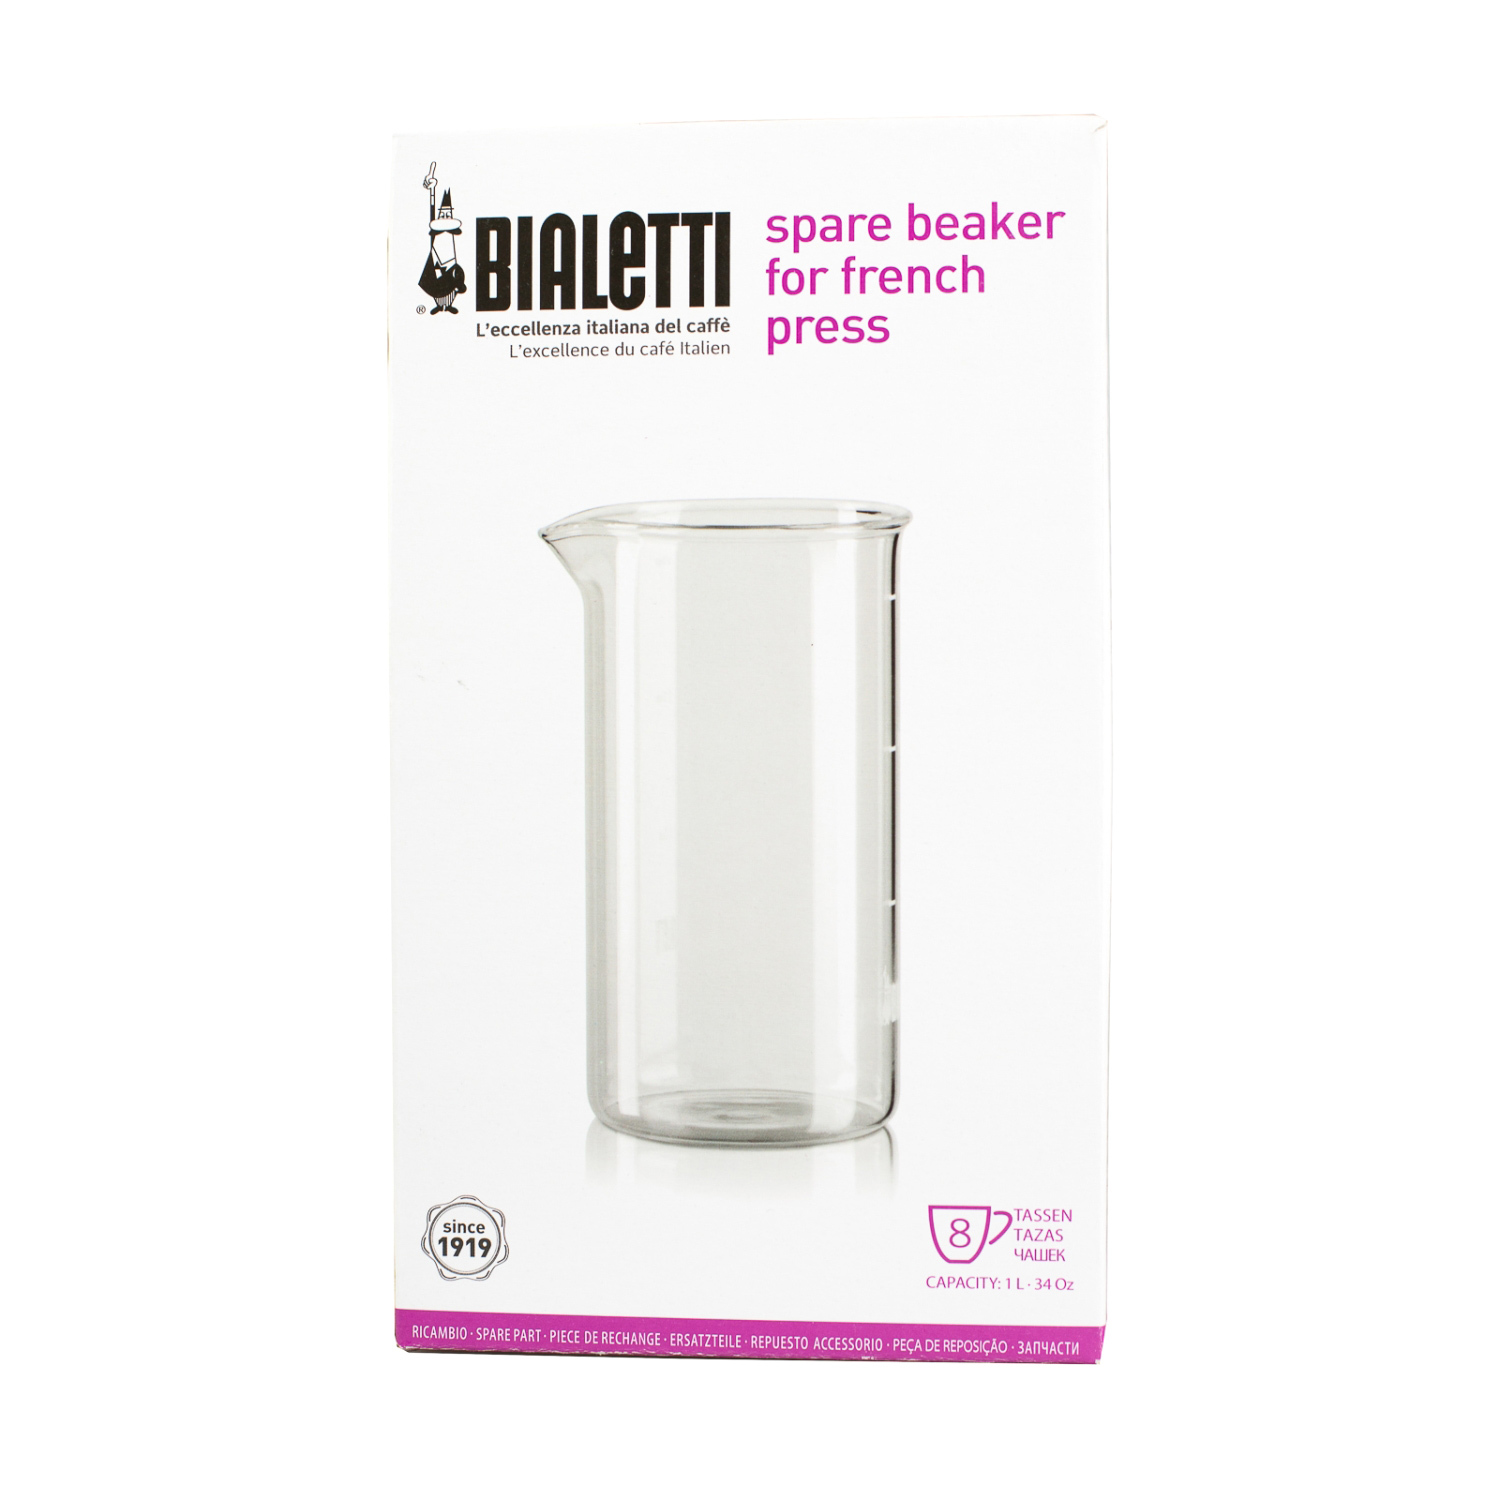 Replacement Glass for 8 Cup French Press